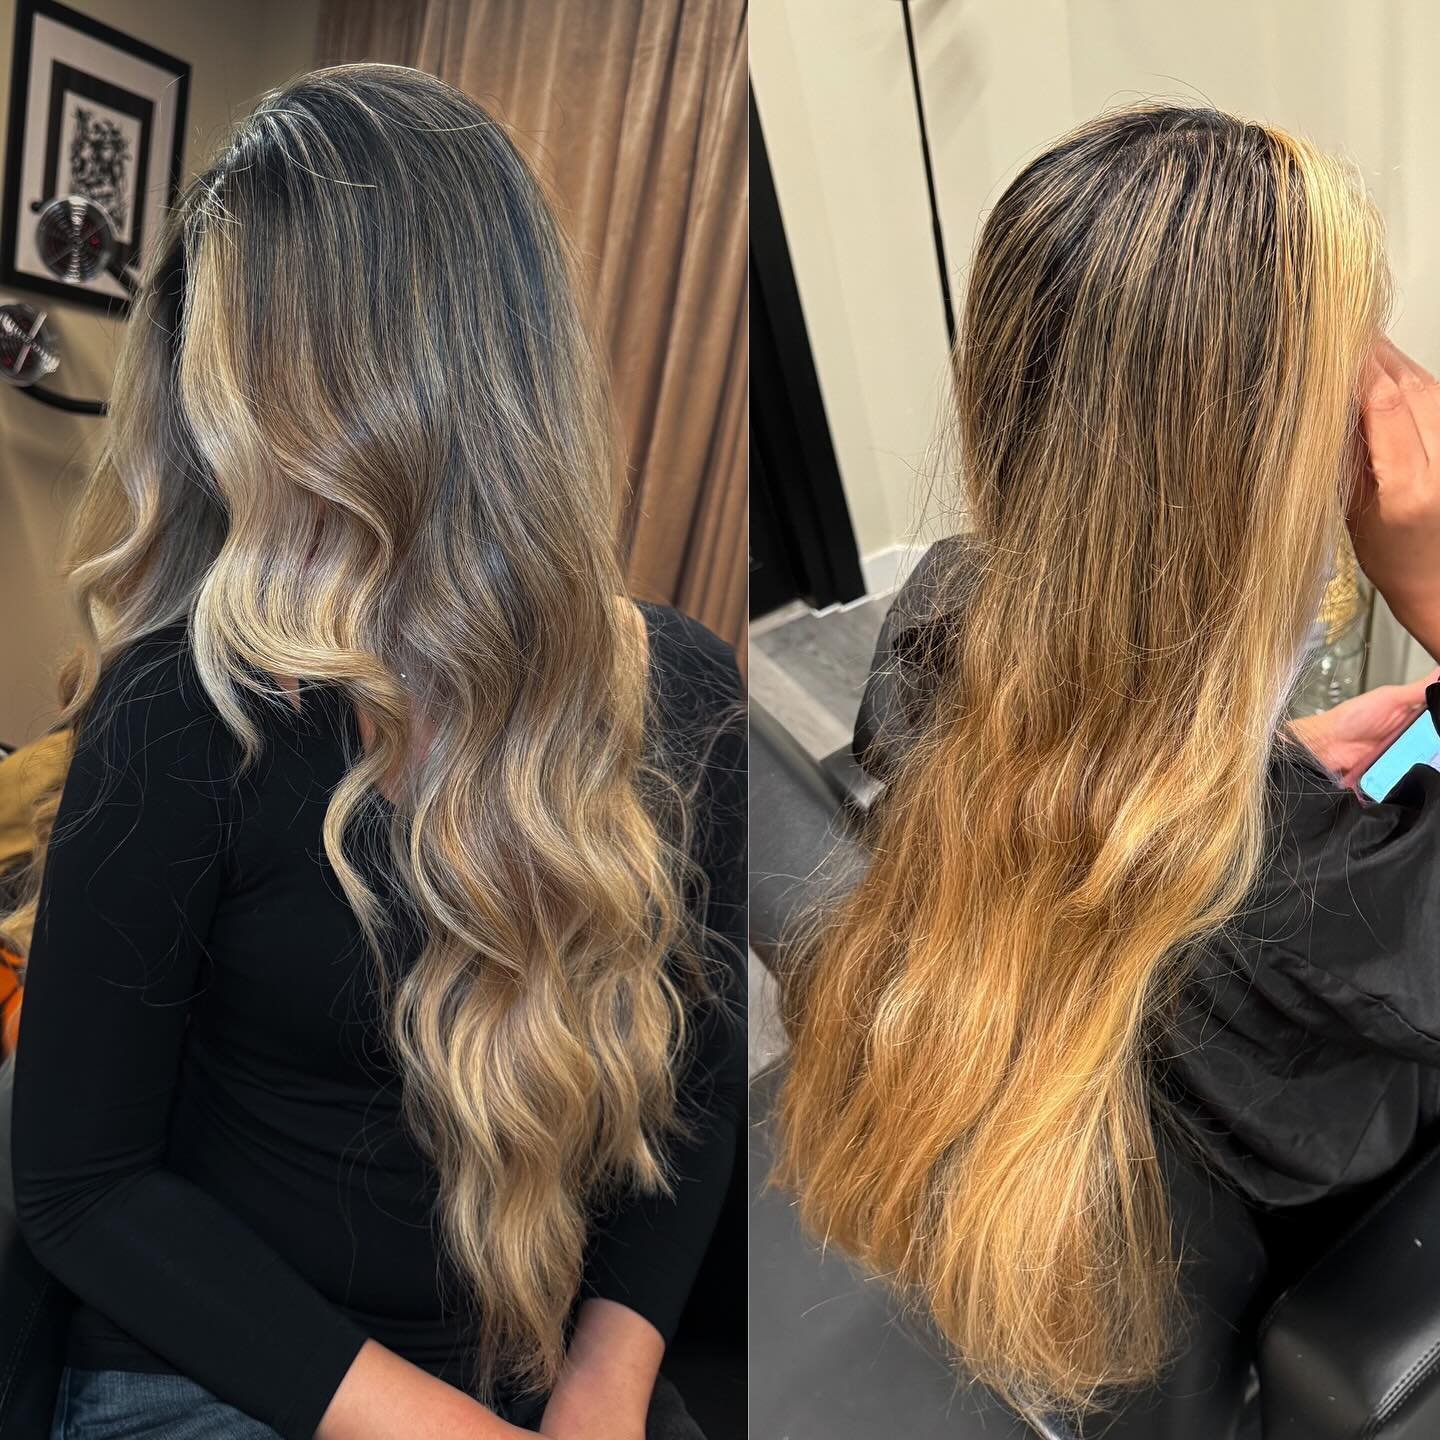 It was disheartening to hear that my client was told by her previous colorist that they weren&rsquo;t experienced enough to work with Asian hair and it left her unsure if neutral blonde tones were a possibility. I often encounter similar concerns fro